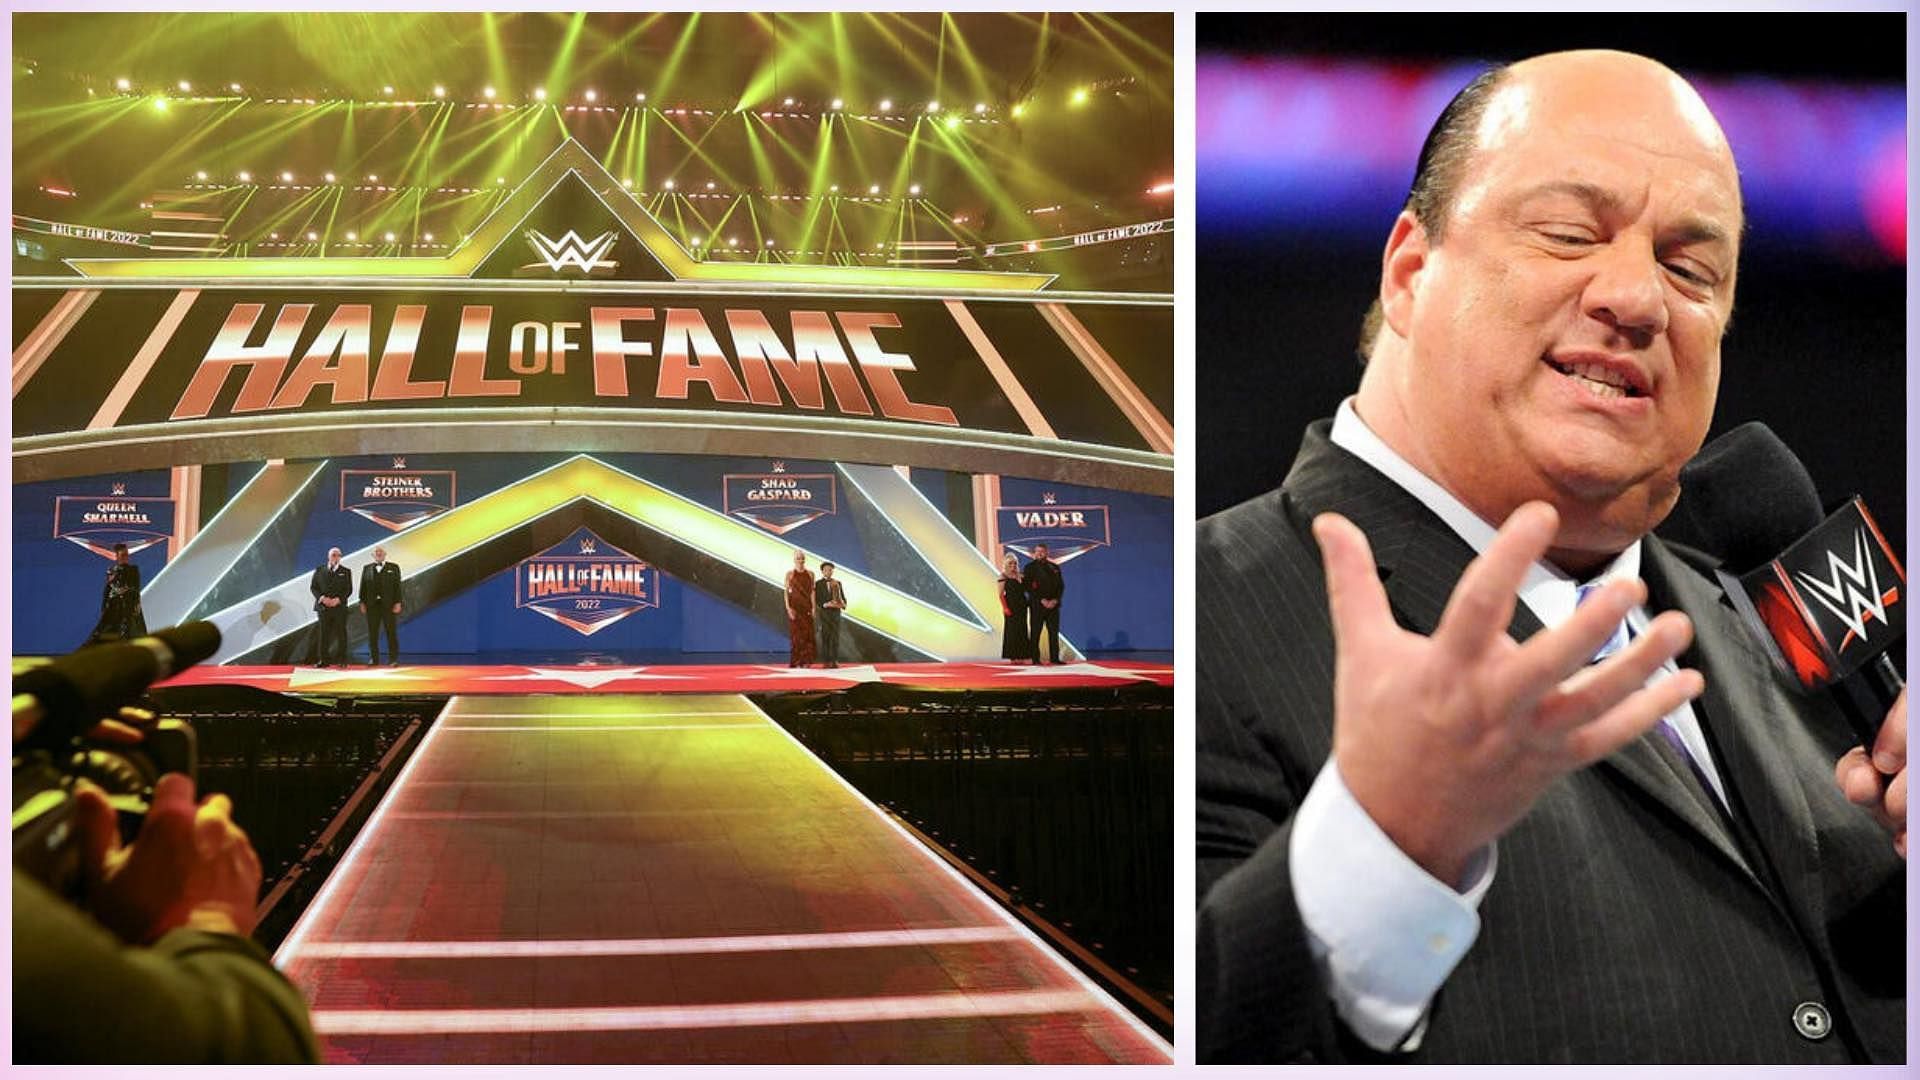 Paul Heyman is being inducted into the WWE Hall of Fame